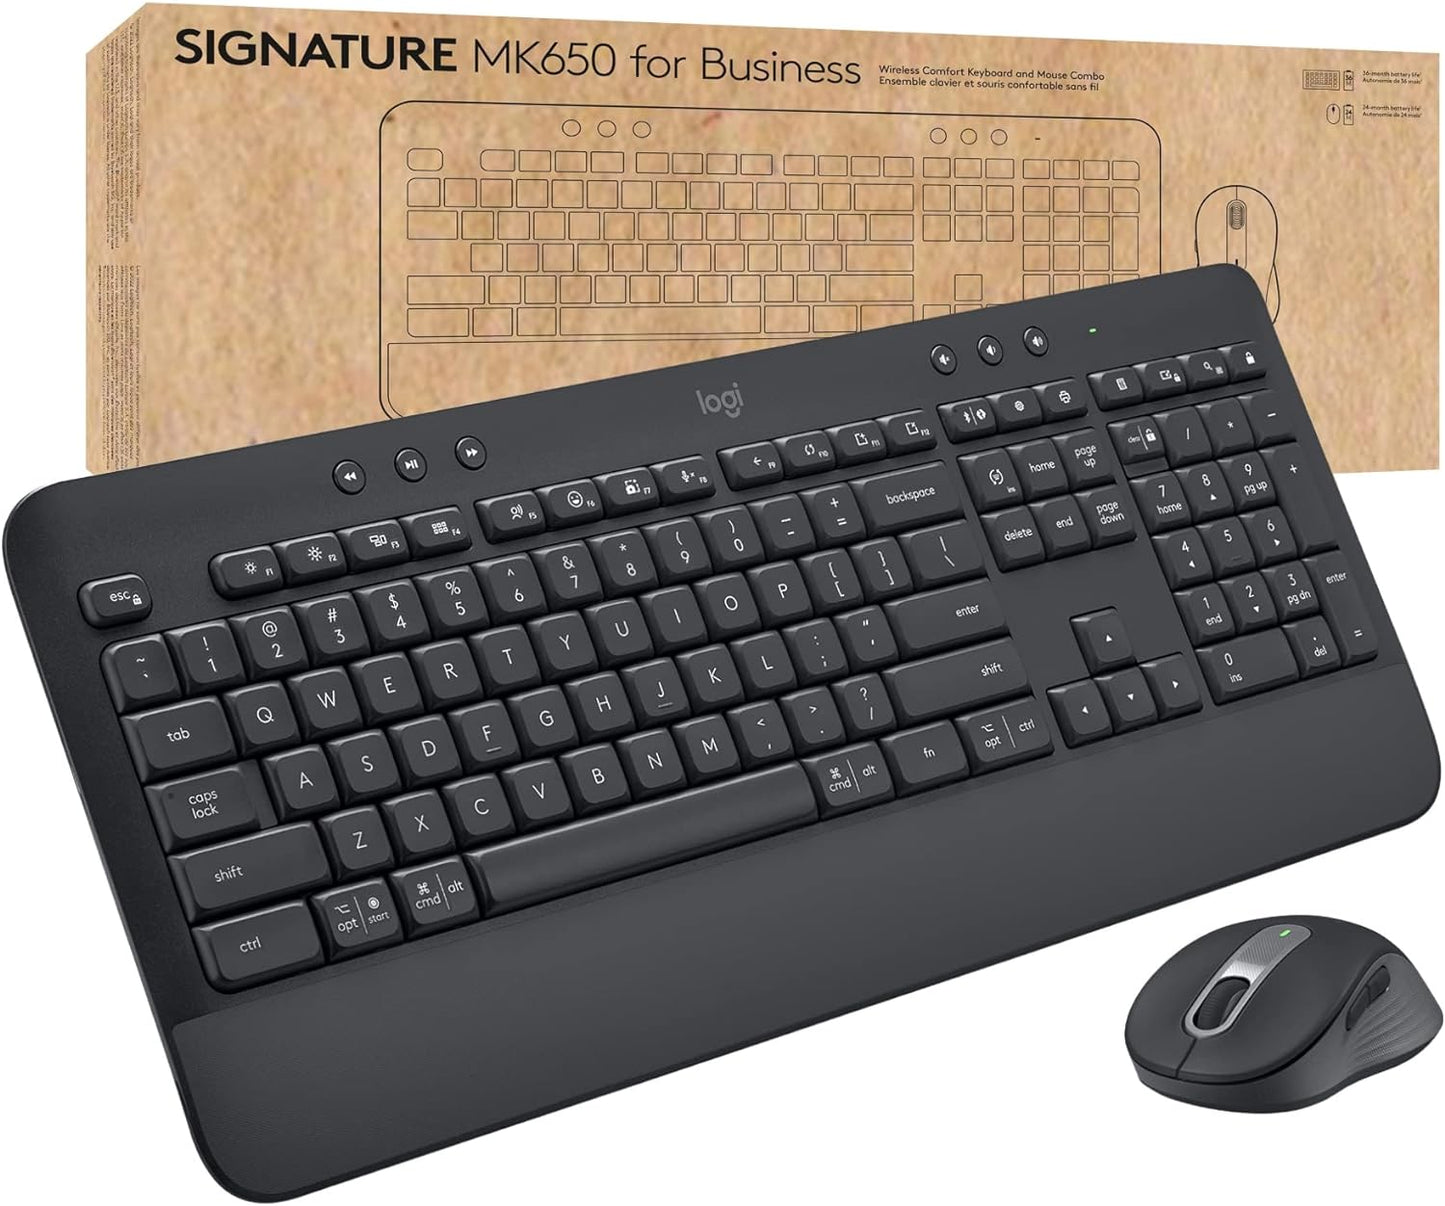 Logitech Signature MK650 Combo For Business 118 Key Full Size Wireless Keyboard & Mouse with USB Receiver Dongle & Bluetooth Connectivity for PC & Laptop, Desktop Computer, Windows, macOS, Linux, Chrome OS, Android - Off White, Graphite